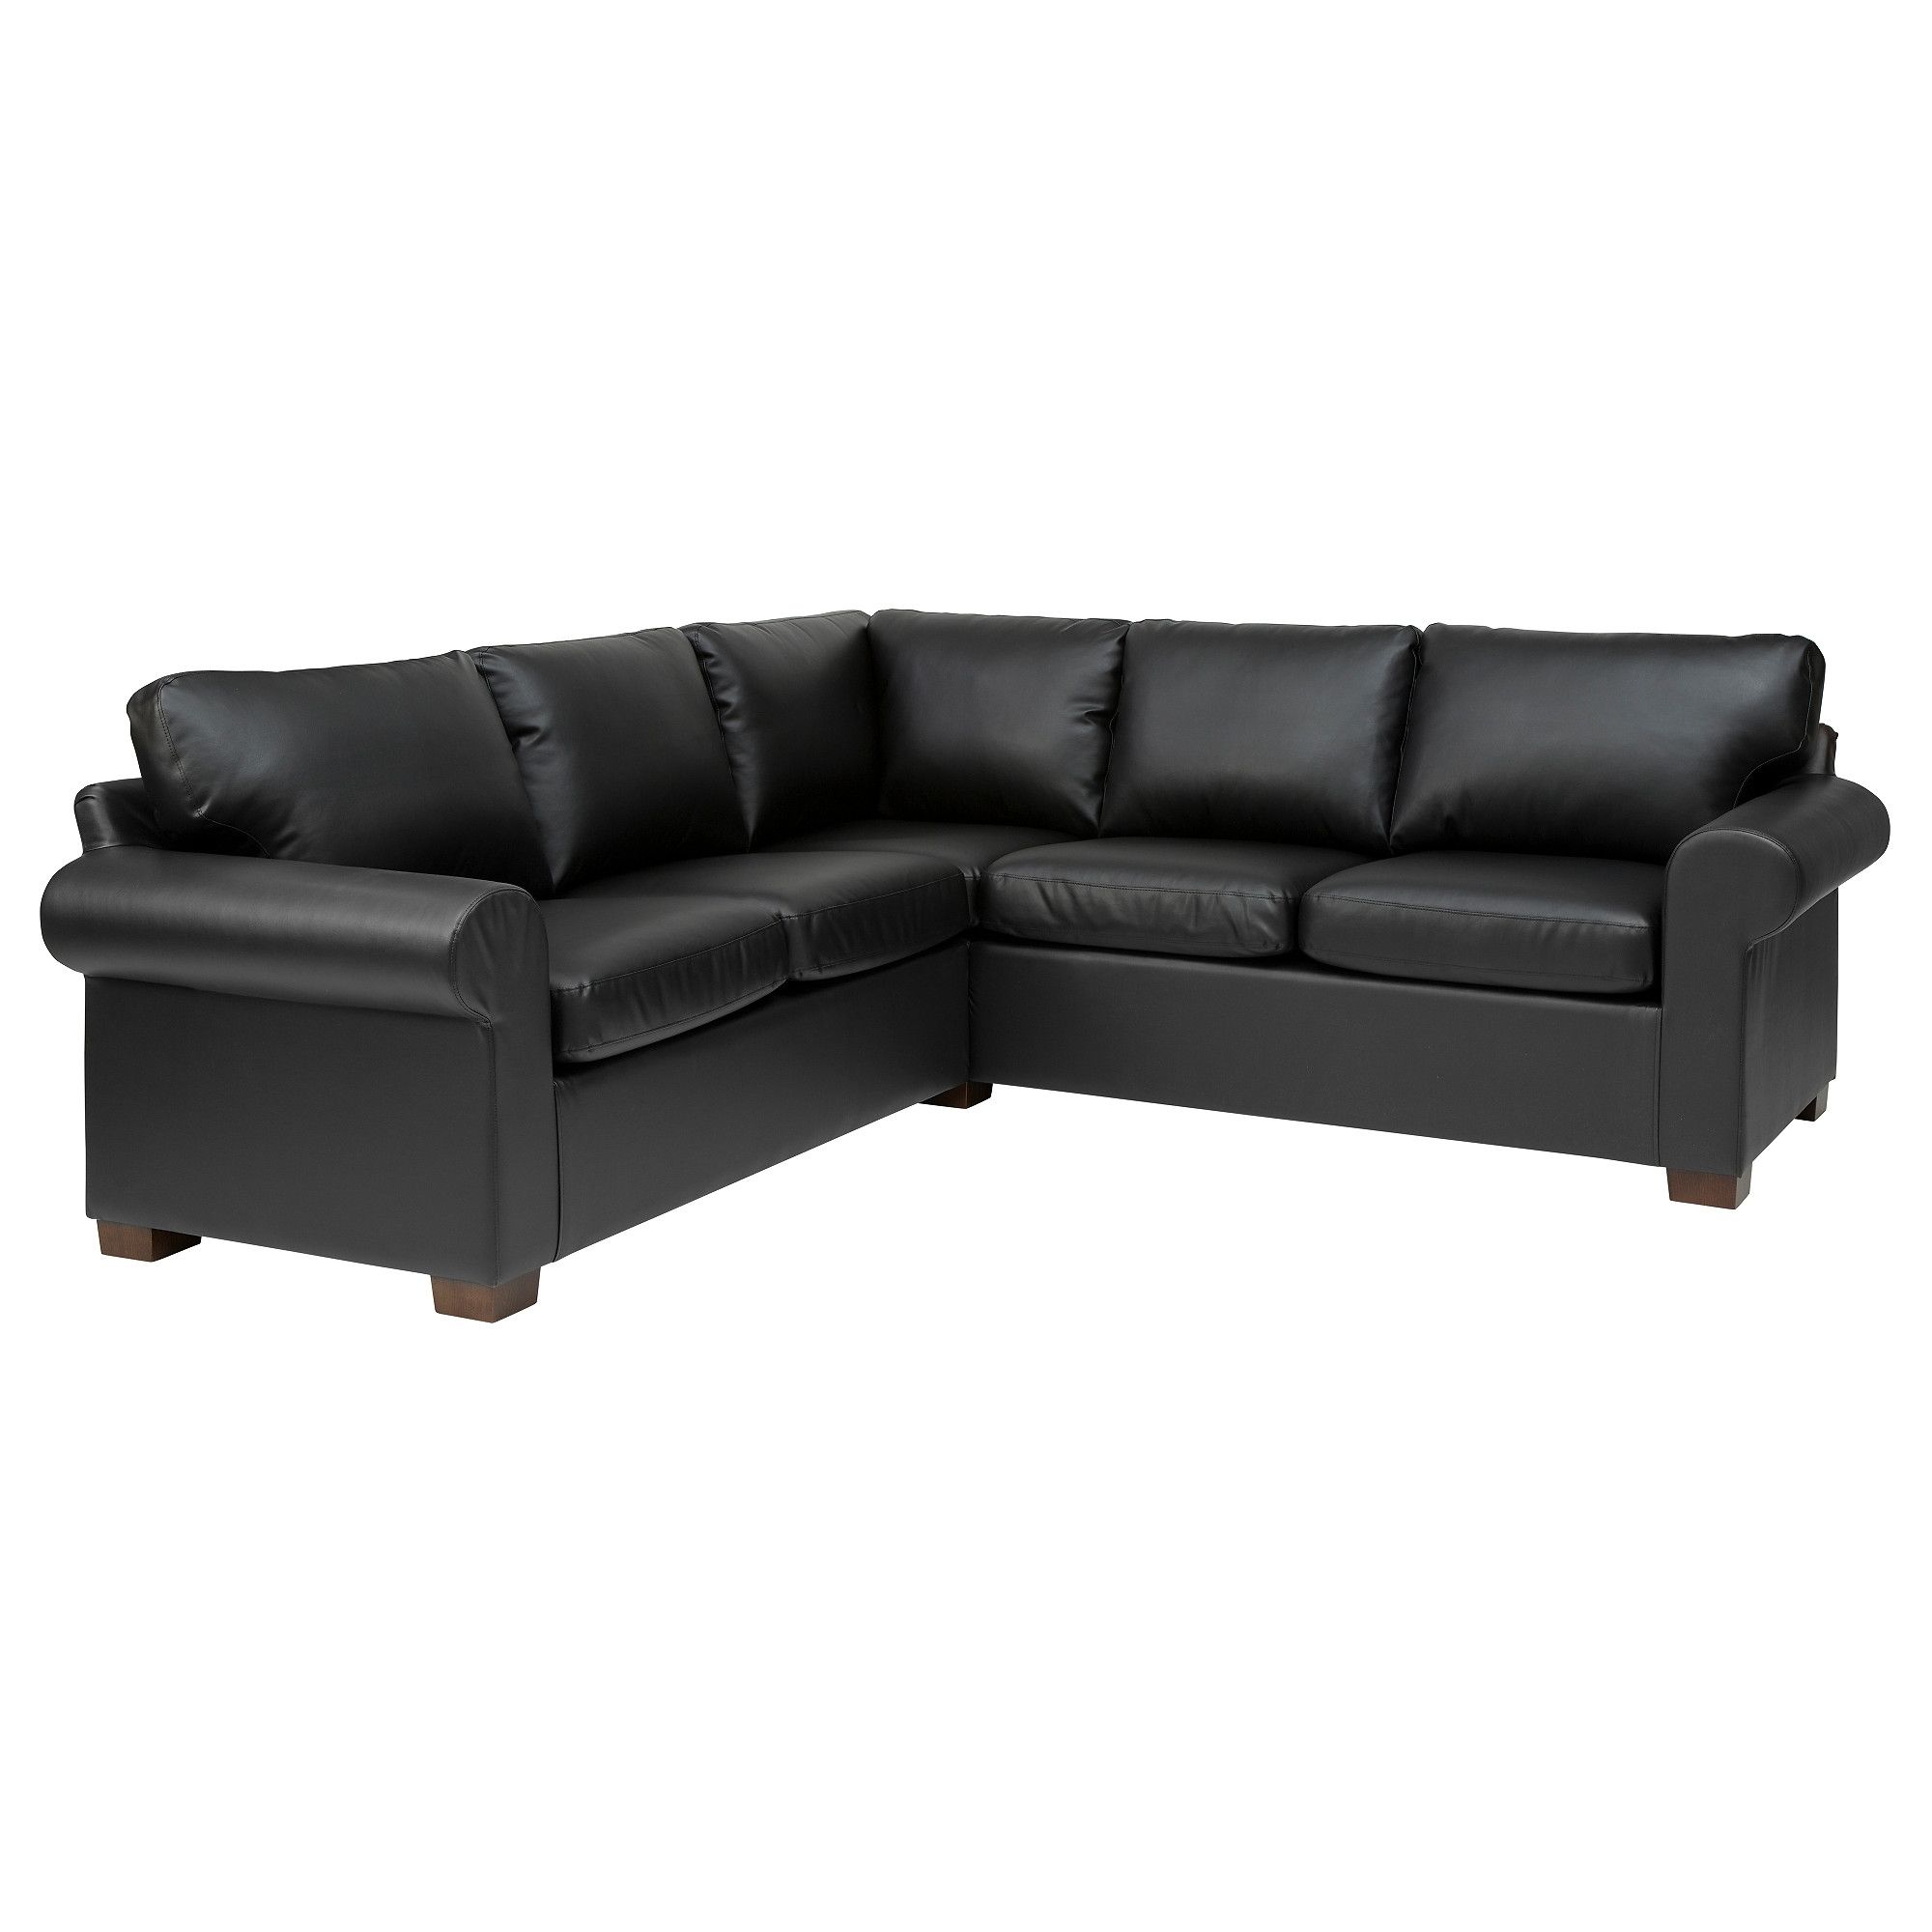 Faux Leather Sectional Sofas Ikea Intended For 4 Seat Leather Sofas (View 8 of 15)